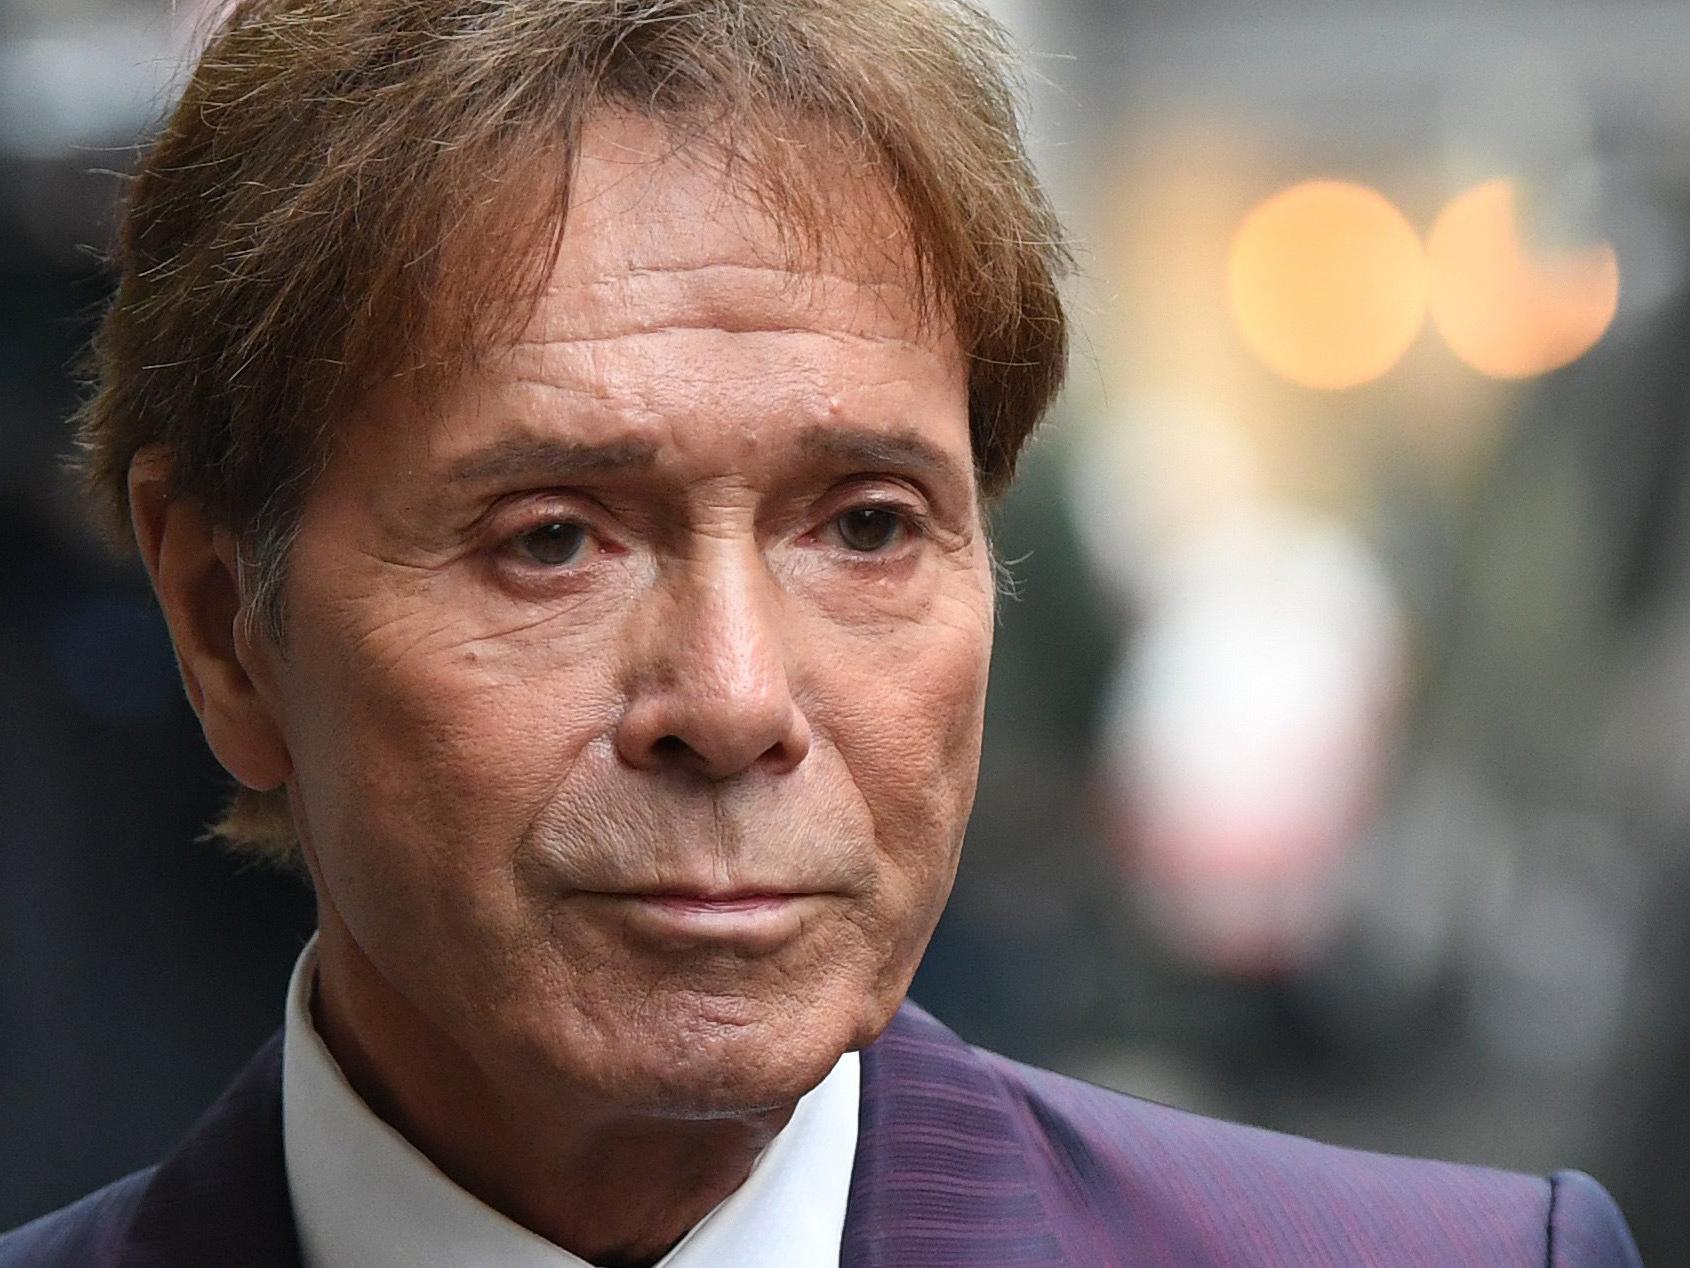 Sir Cliff Richard arrives at the Royal Courts of Justice in London